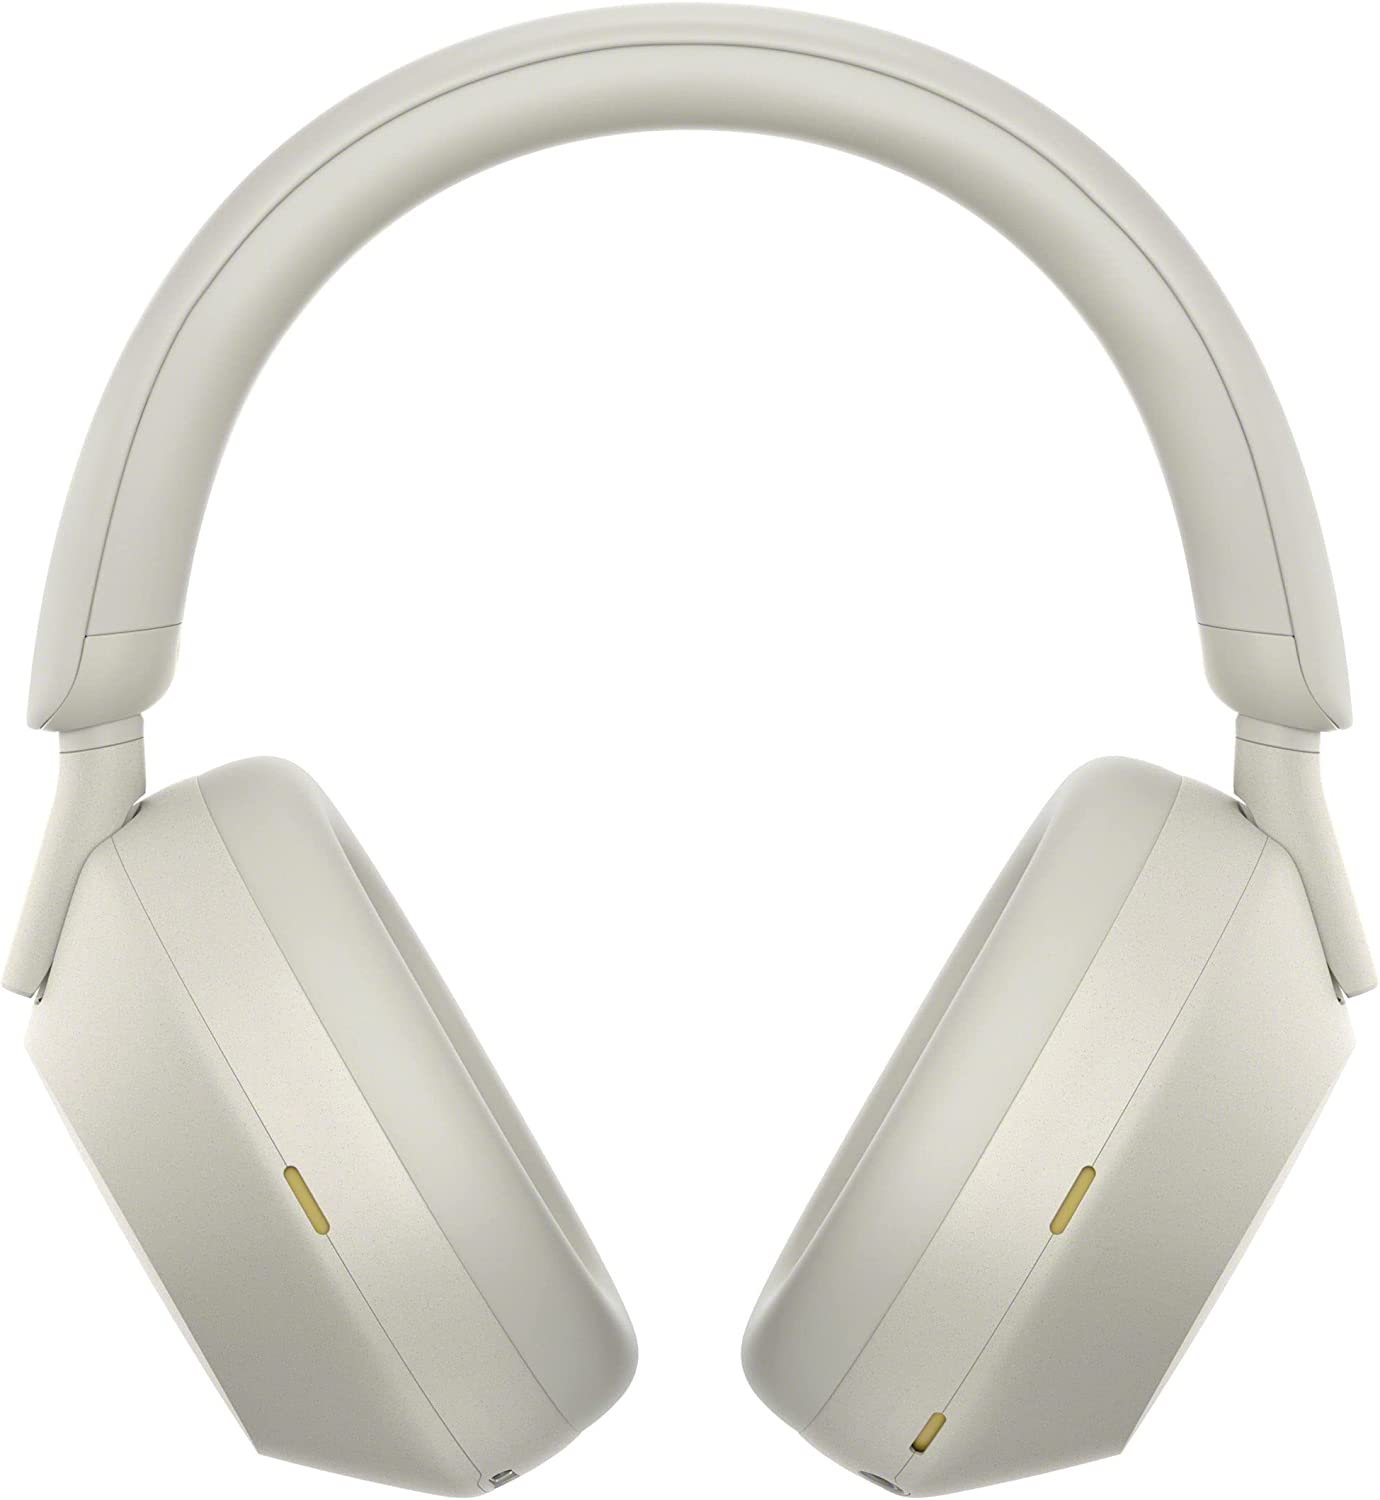 Sony WH-1000XM5 Bluetooth Wireless Noise Canceling Headphones - Silver - Pro-Distributing